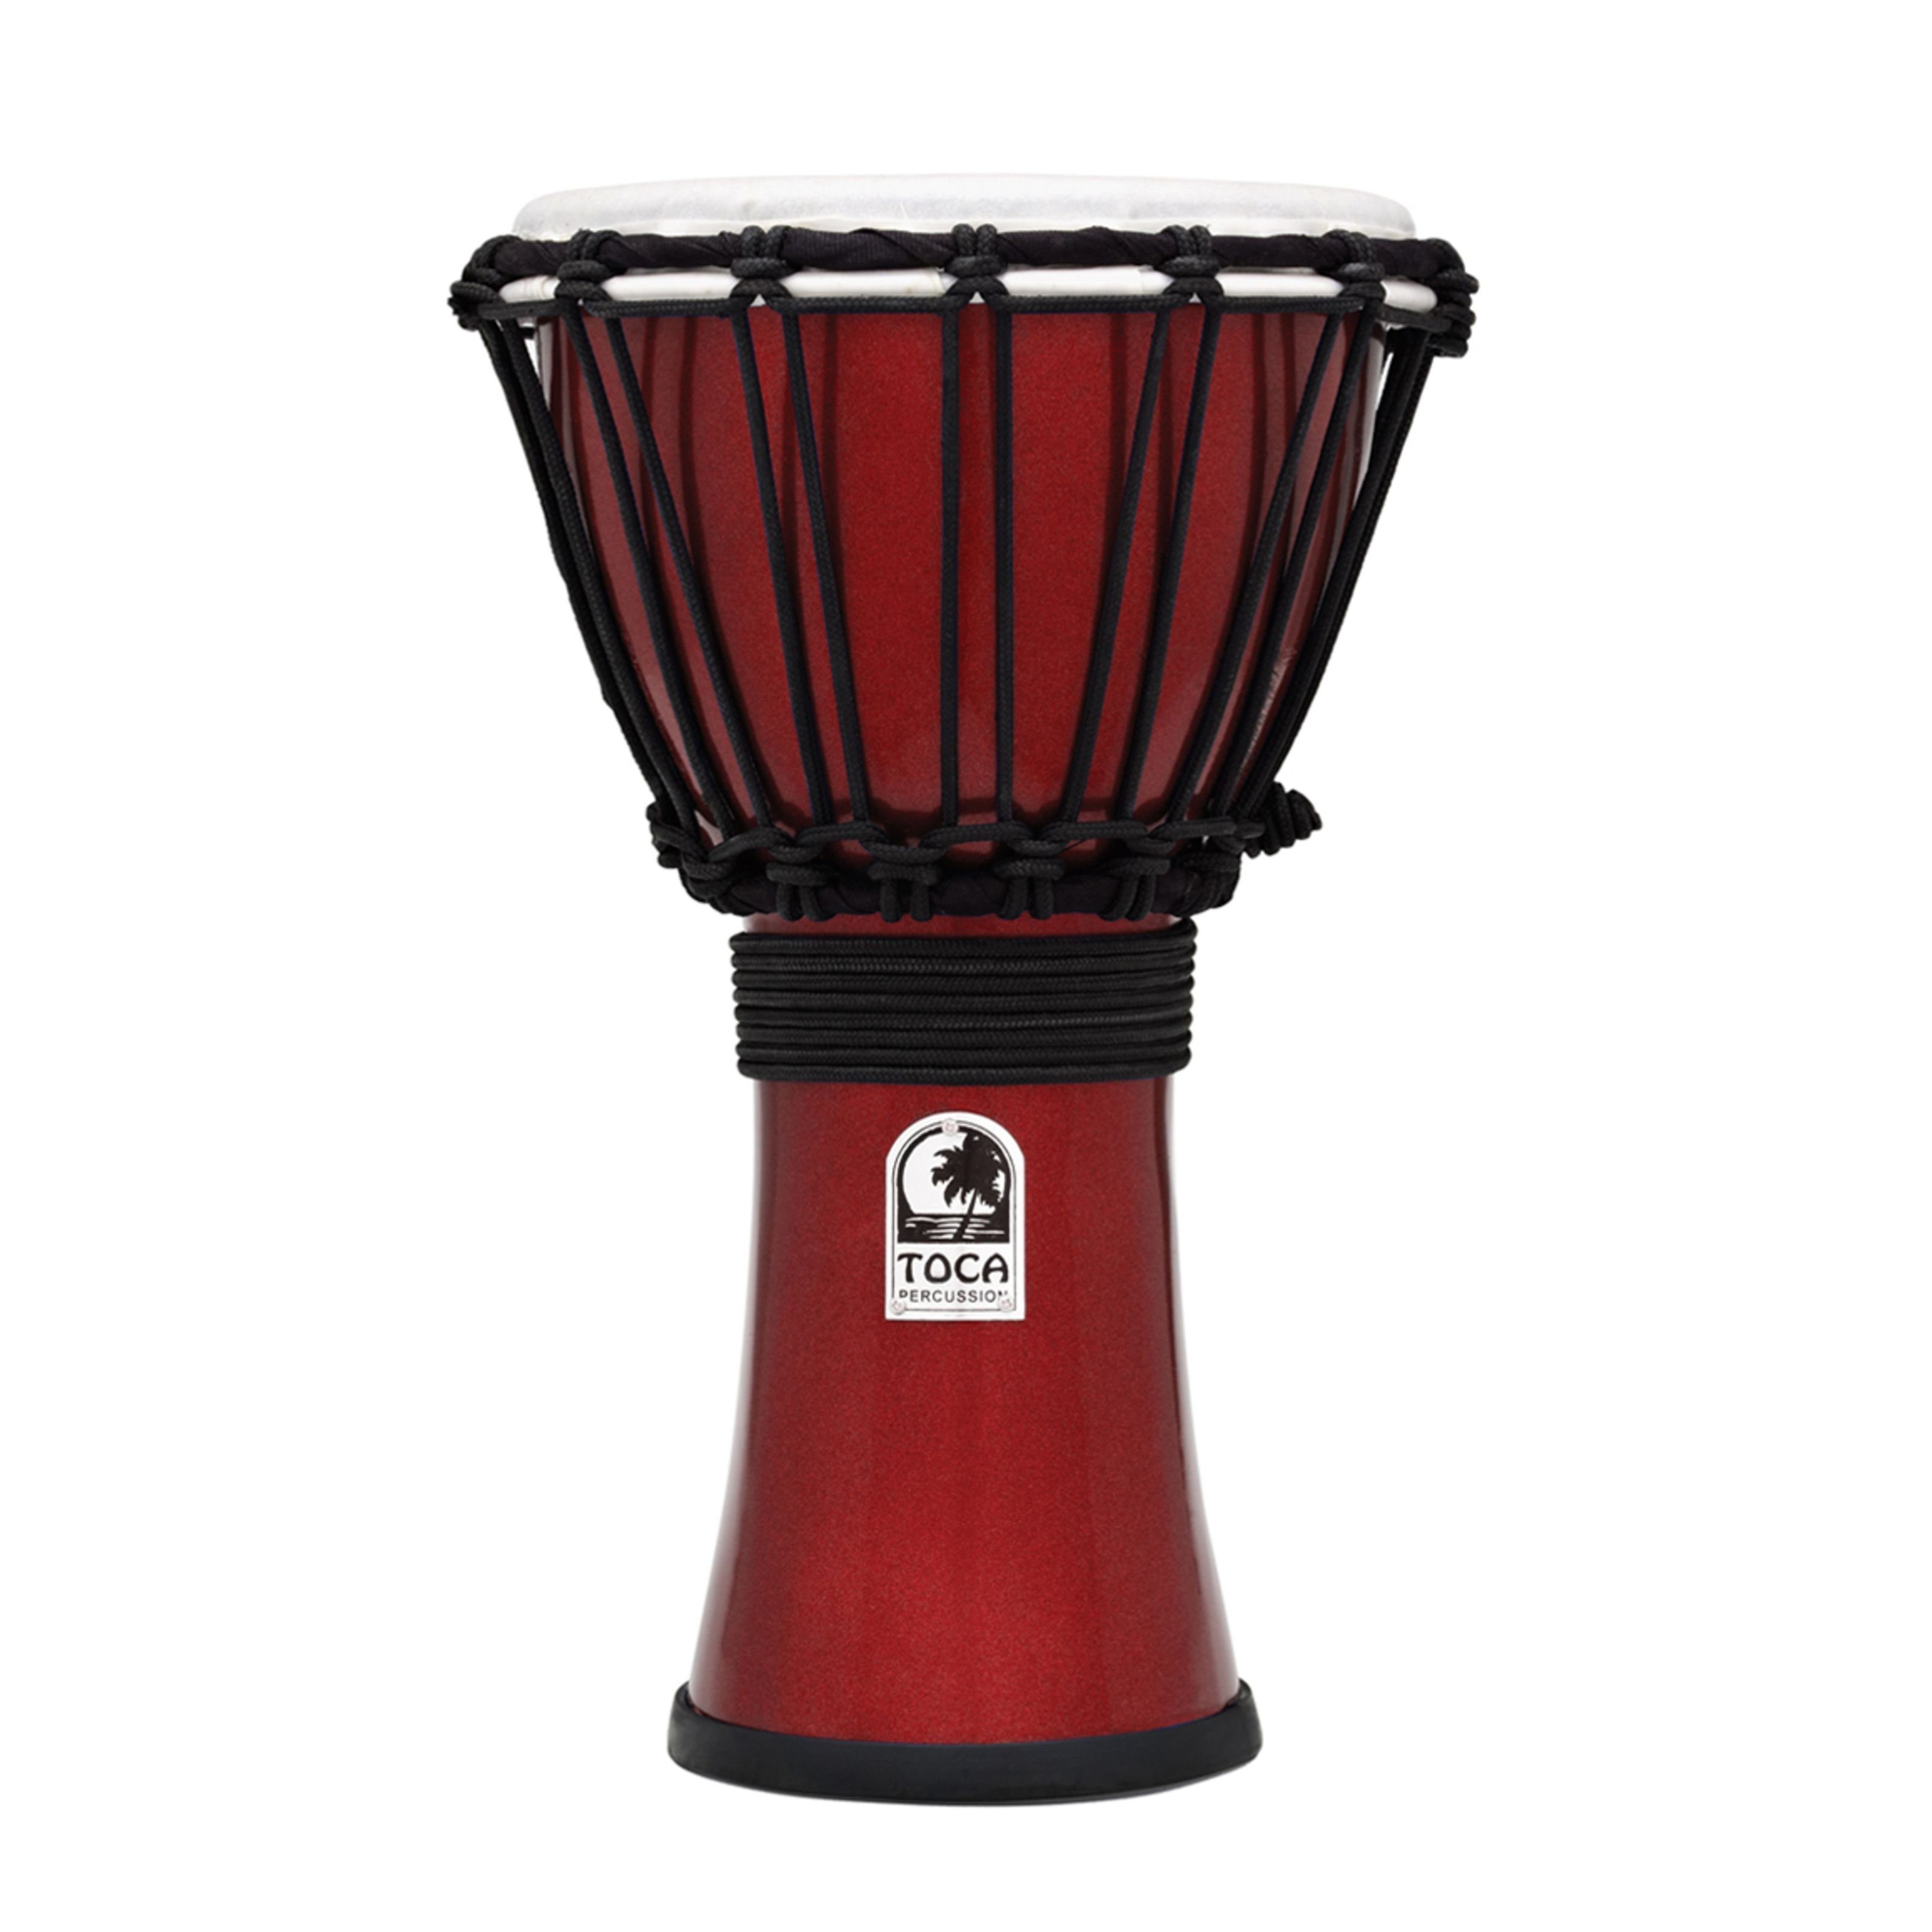 Toca Percussion Djemben,ColorSound Djembe TFCDJ-7MR, 7", Red, Percussion, Djemben, ColorSound Djembe TFCDJ-7MR, 7", Red - Djembe